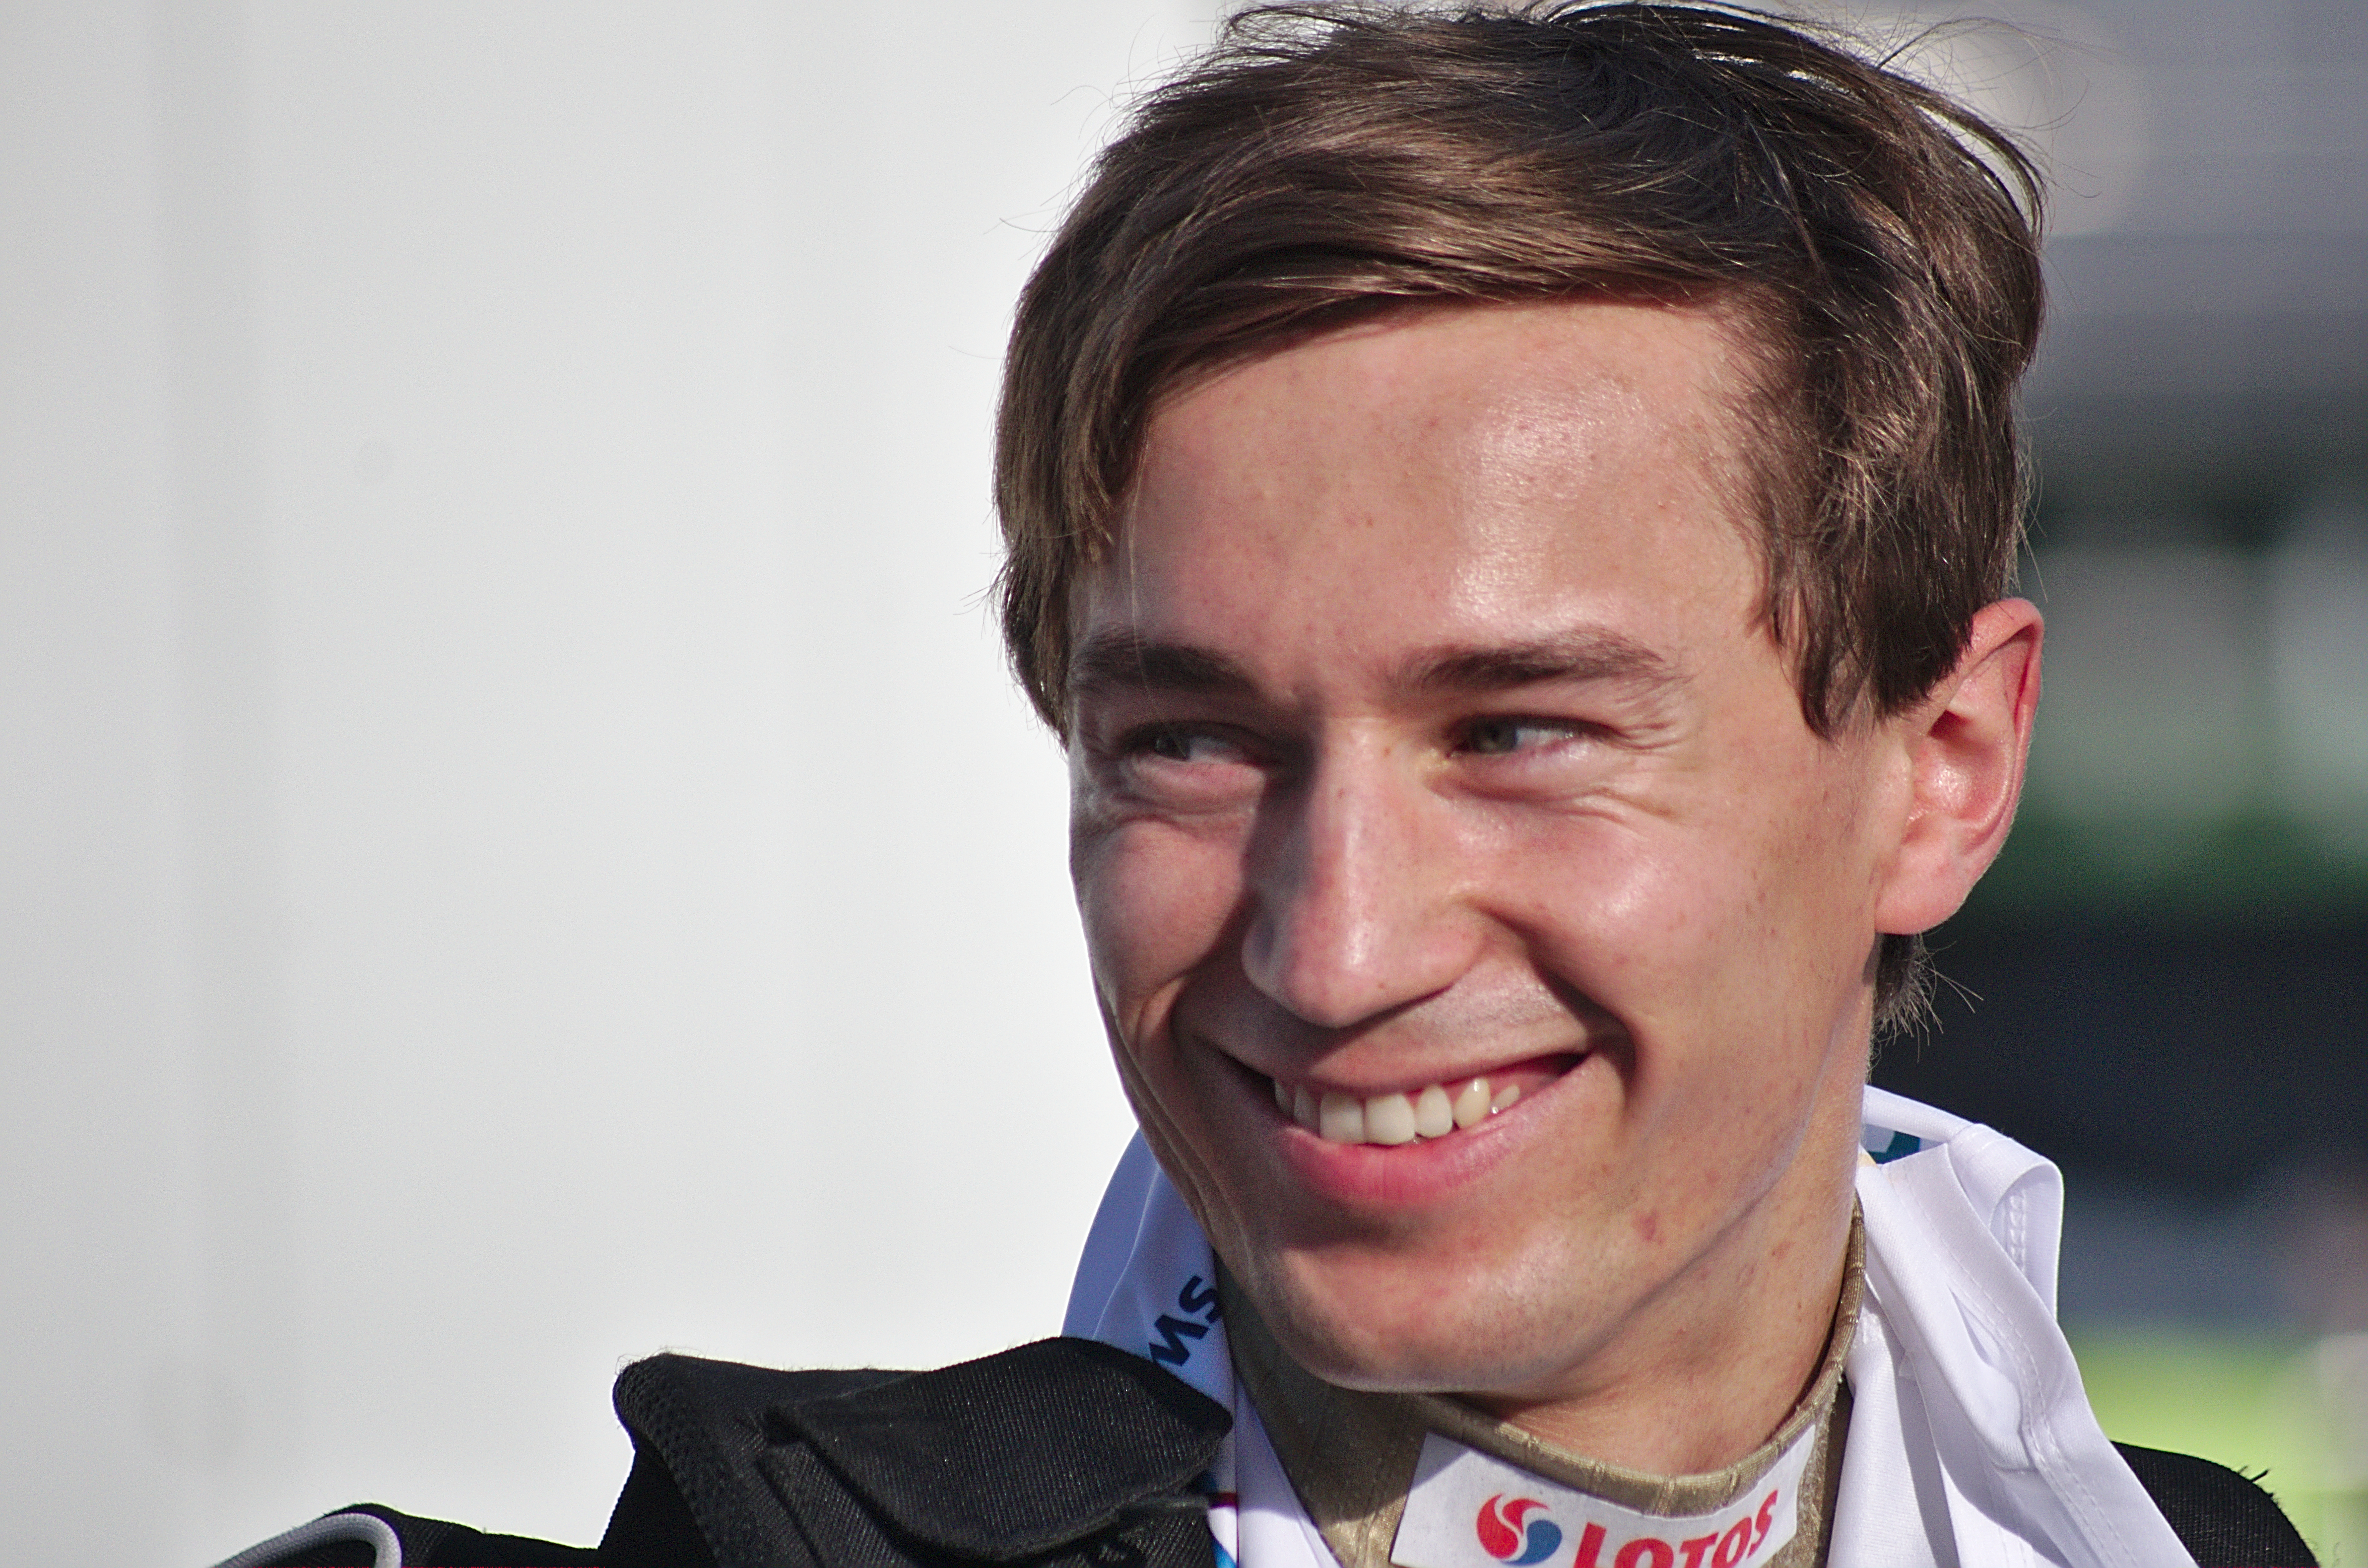 HQ Kamil Stoch Wallpapers | File 17805.51Kb